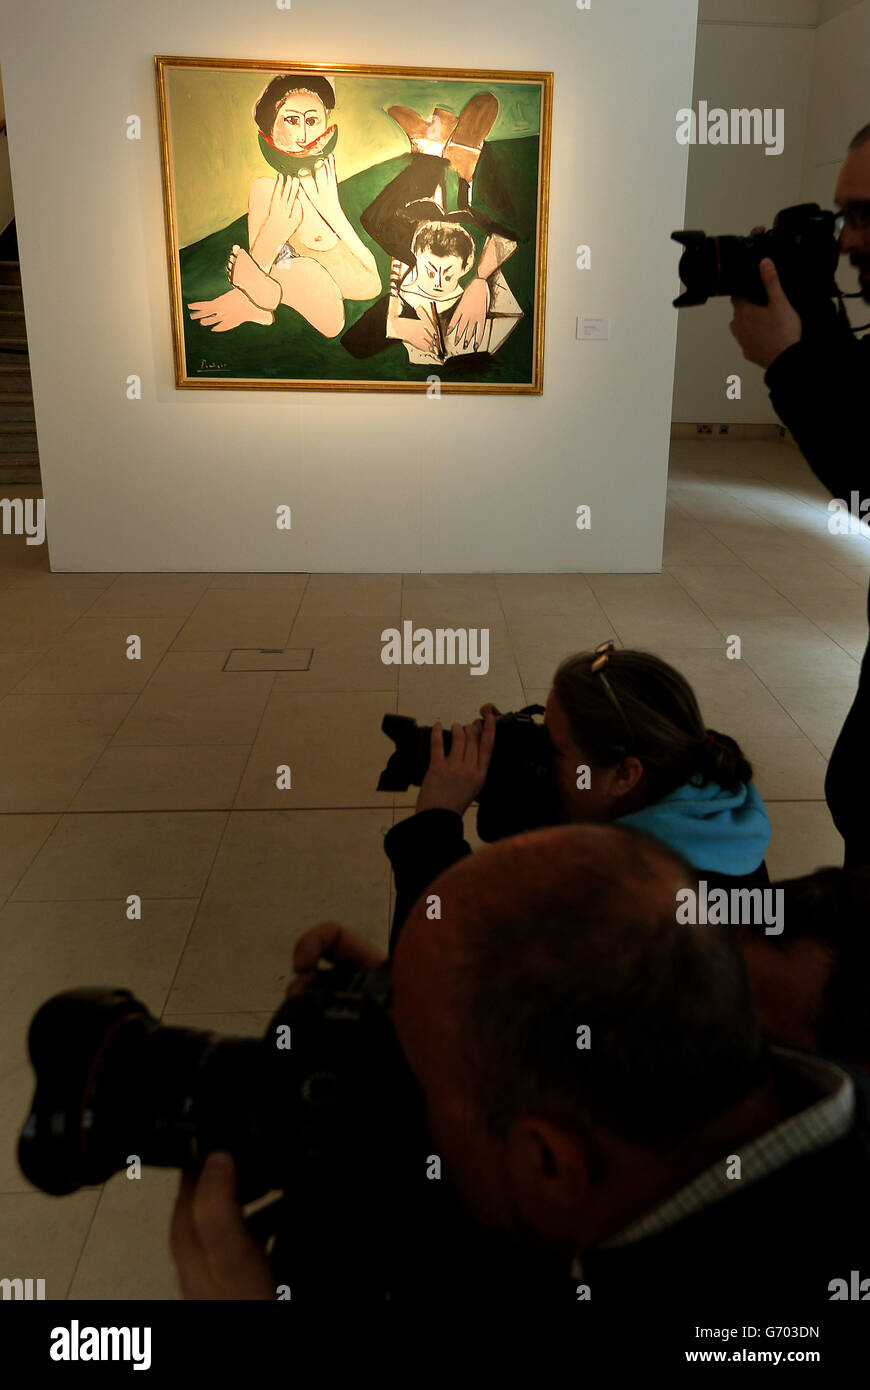 A group of press photographers work close to a Picasso painting, titled 'Mangeuse de pasteque et homme ecrivant' that will be auctioned in New York on 6th May, and has an estimated sale value of between $7-10million, at the Christie's showroom in central London. Stock Photo